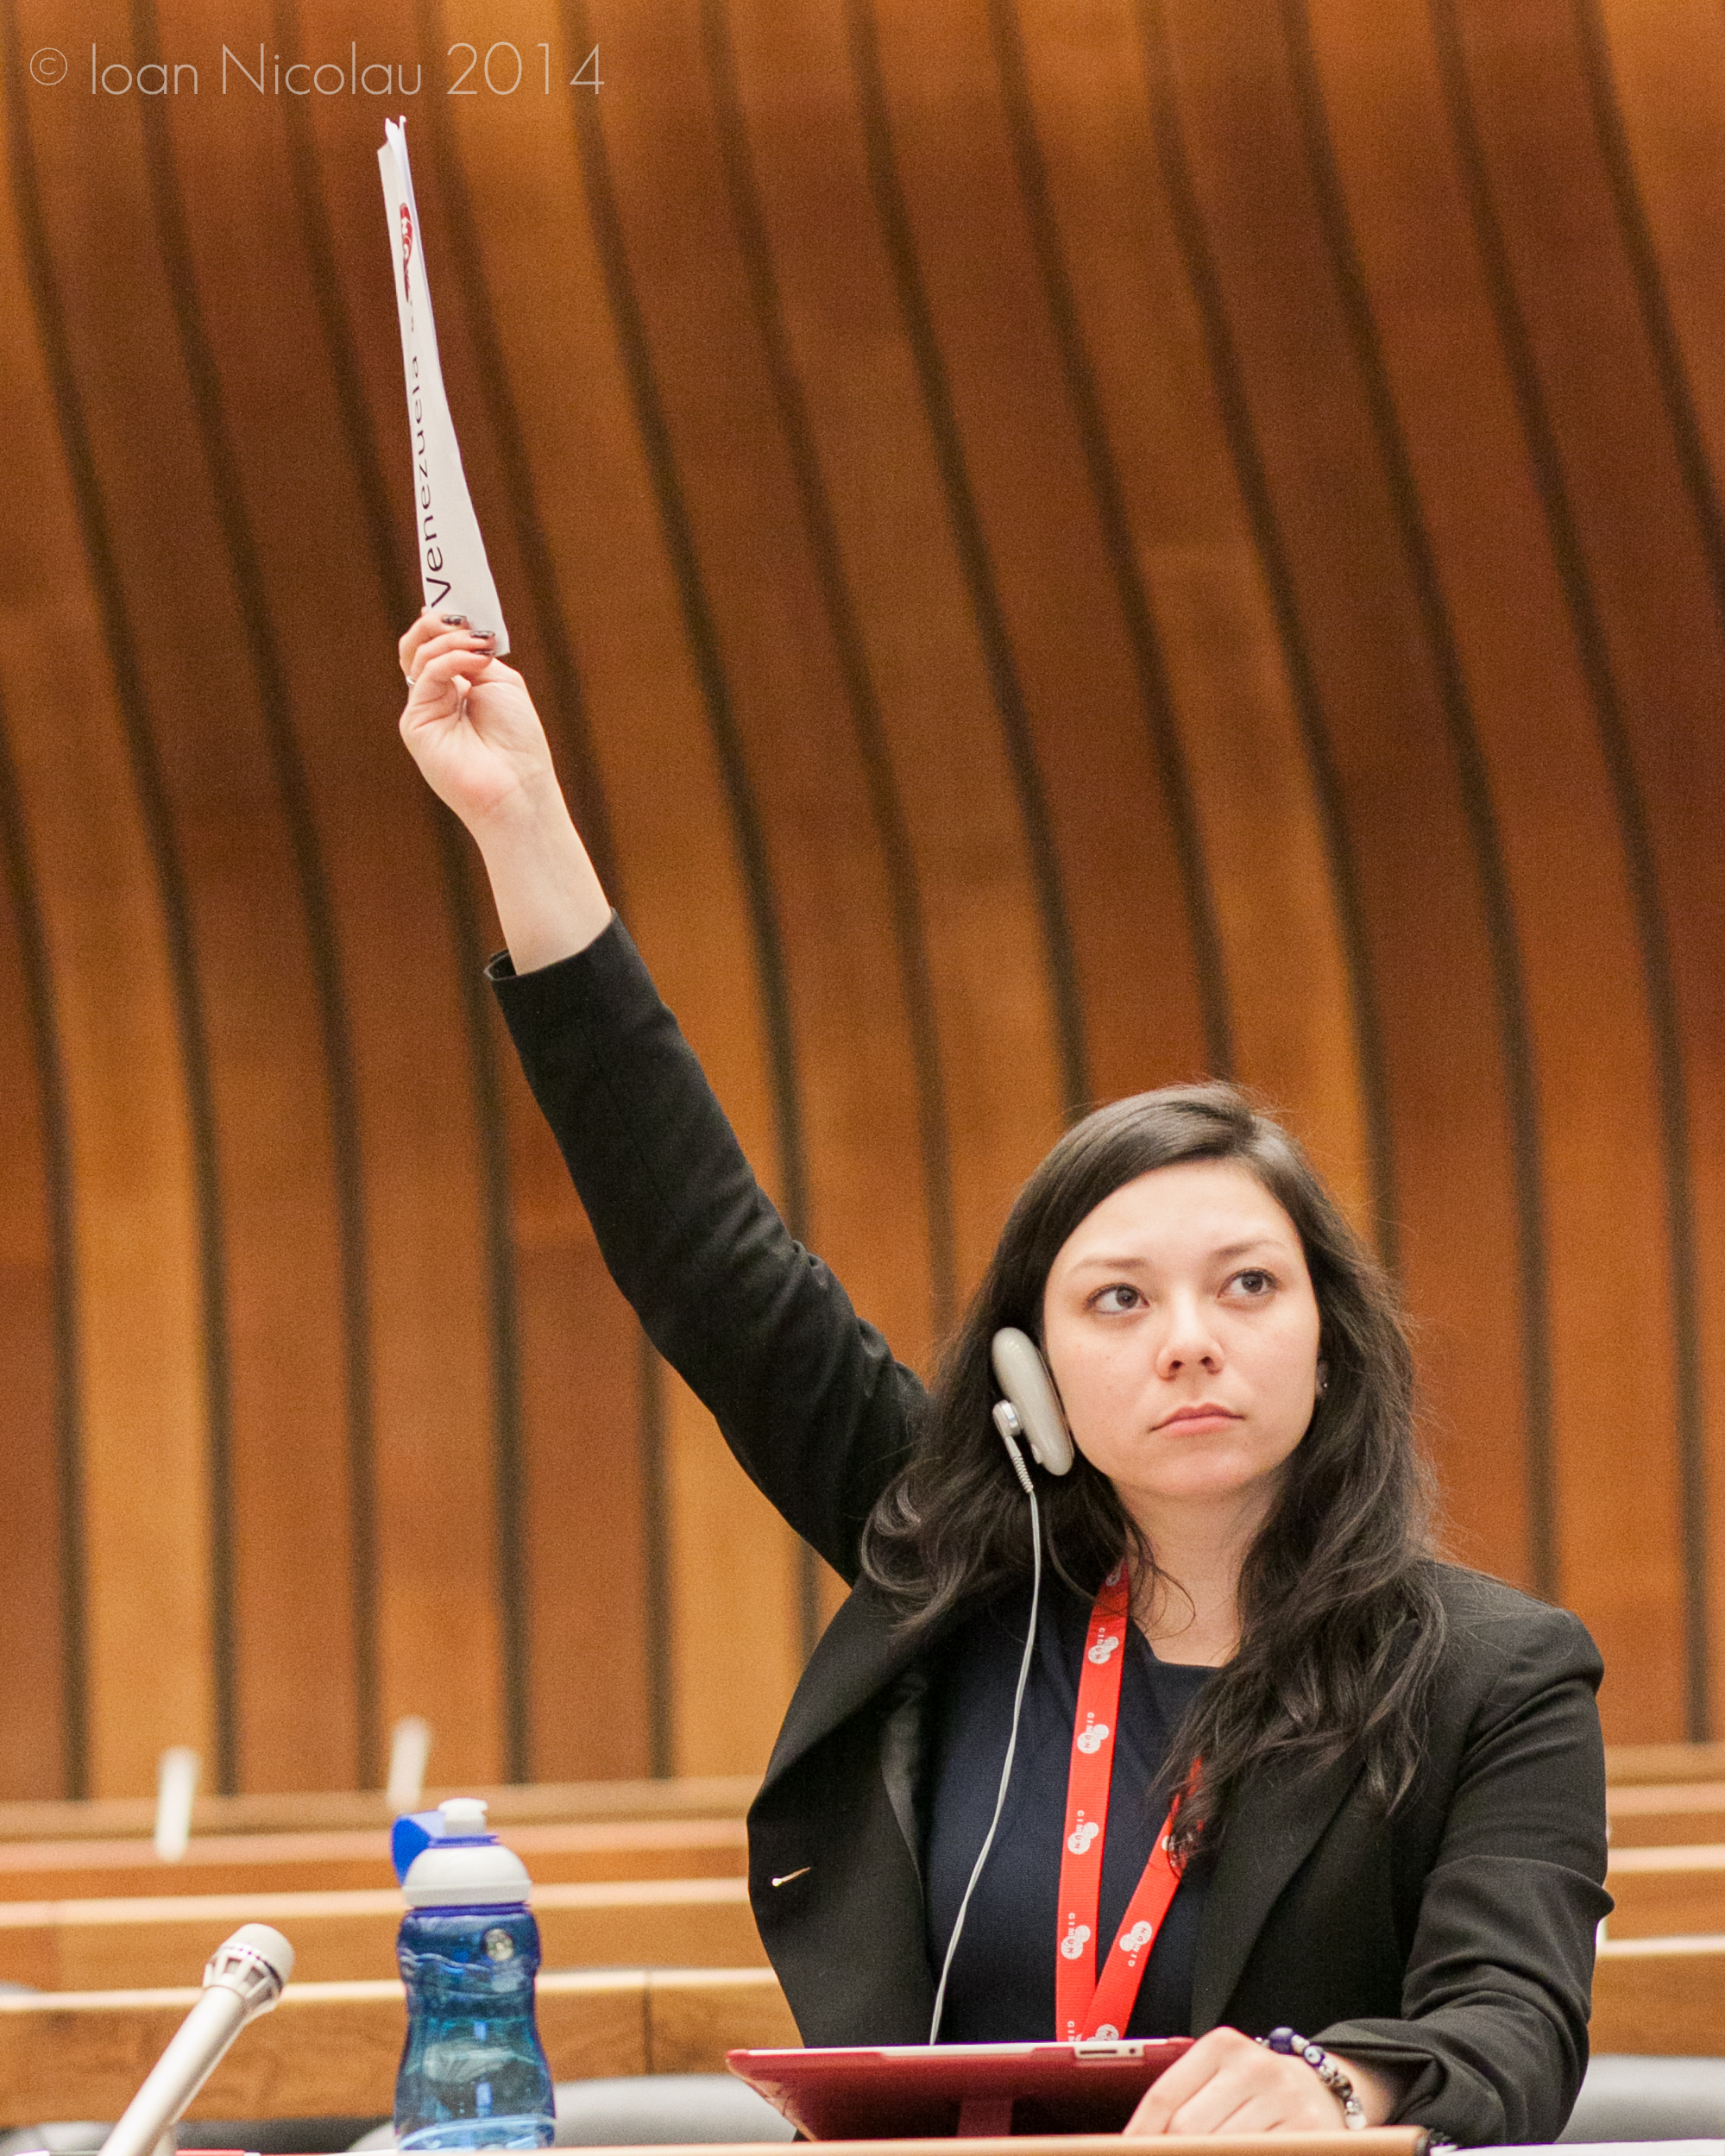 Pace University student Jackie Kelleher '15 representing Venezuela in a simulation of the Human Rights Council at the 2014 Geneva International Model UN conference. Photo courtesy of GIMUN.